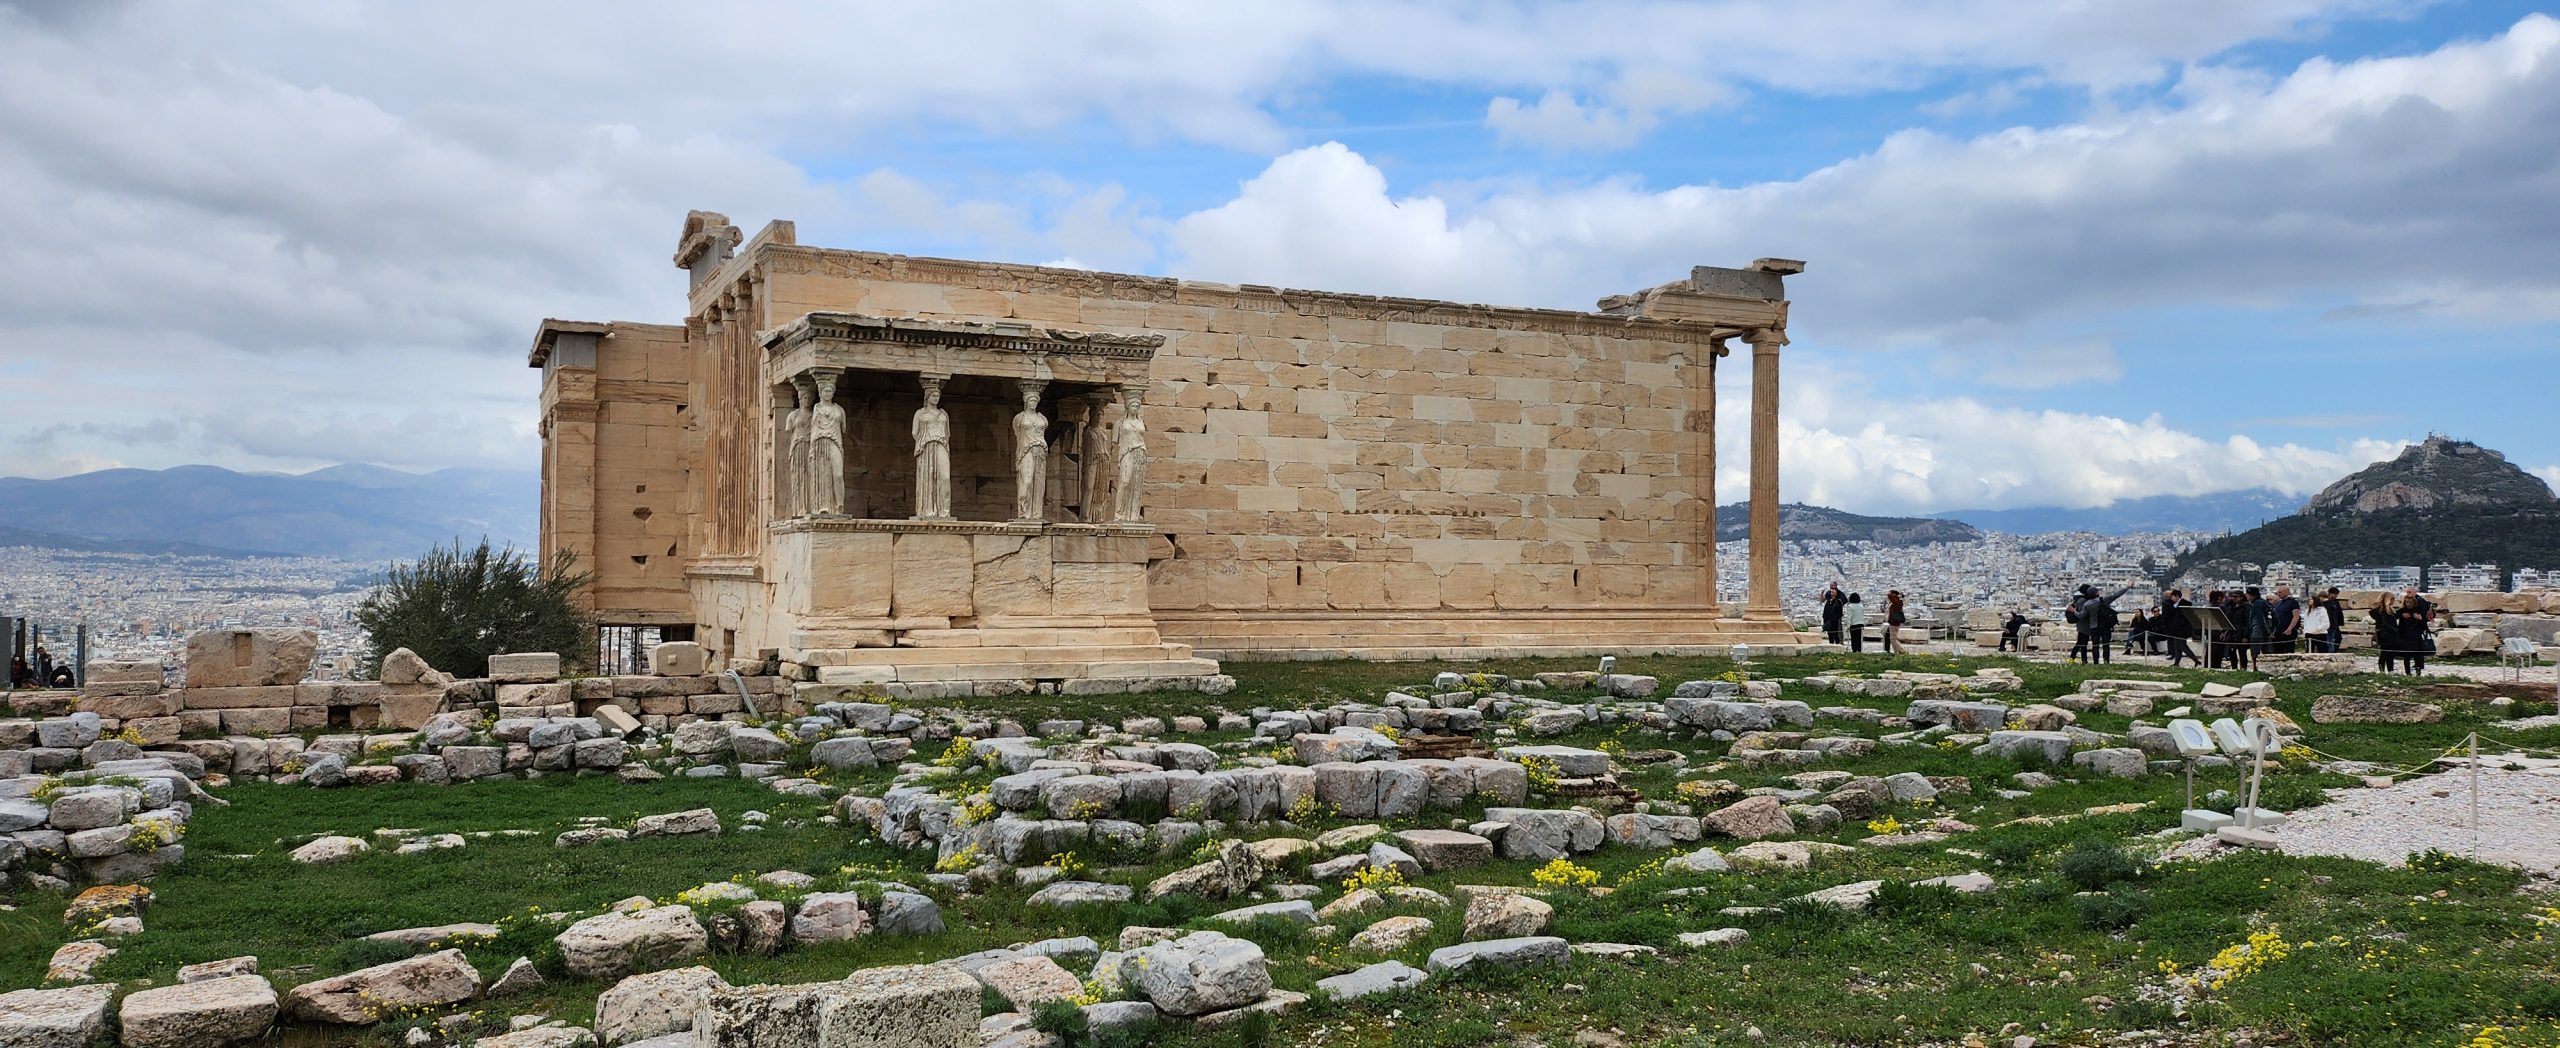 Old Temple of Athena